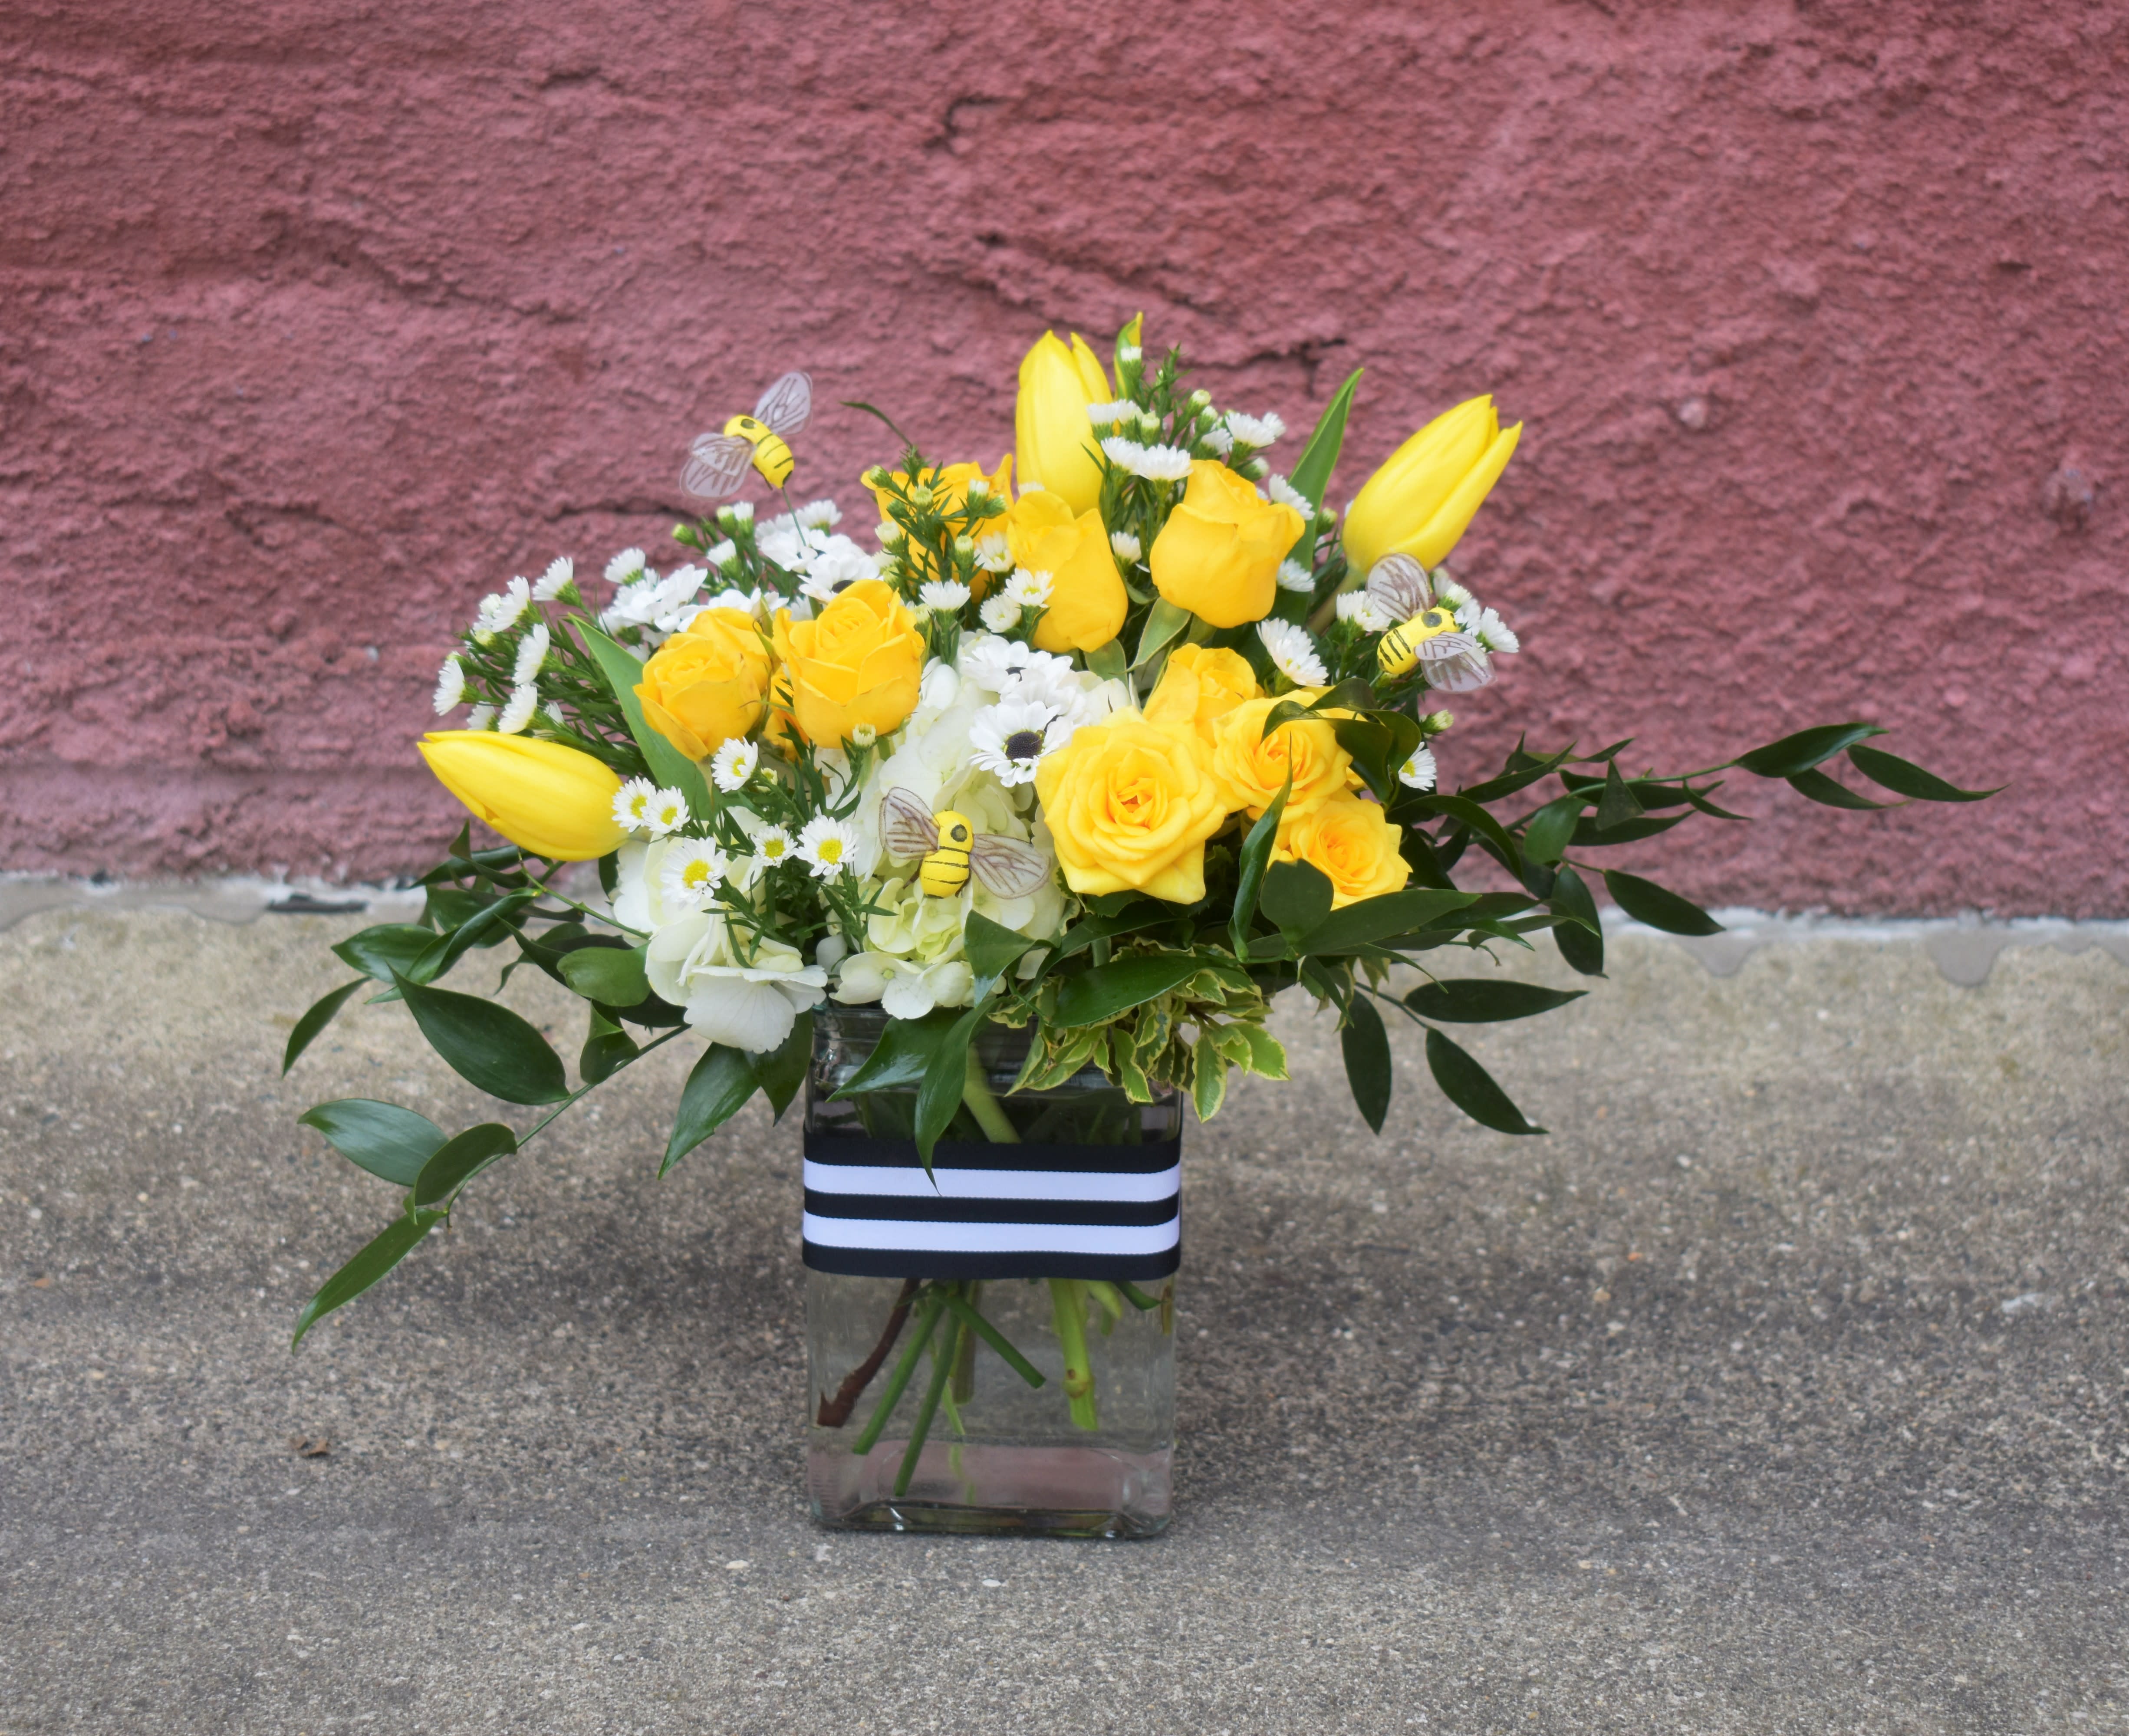 Honey Bee - This adorable bouquet is designed in a glass vase with yellow tulips, yellow spray roses, white hydrangea, white asters, lush greenery, and accented with cute little bees and a black/white striped ribbon band. A fun and cheery gift for any occasion! . 